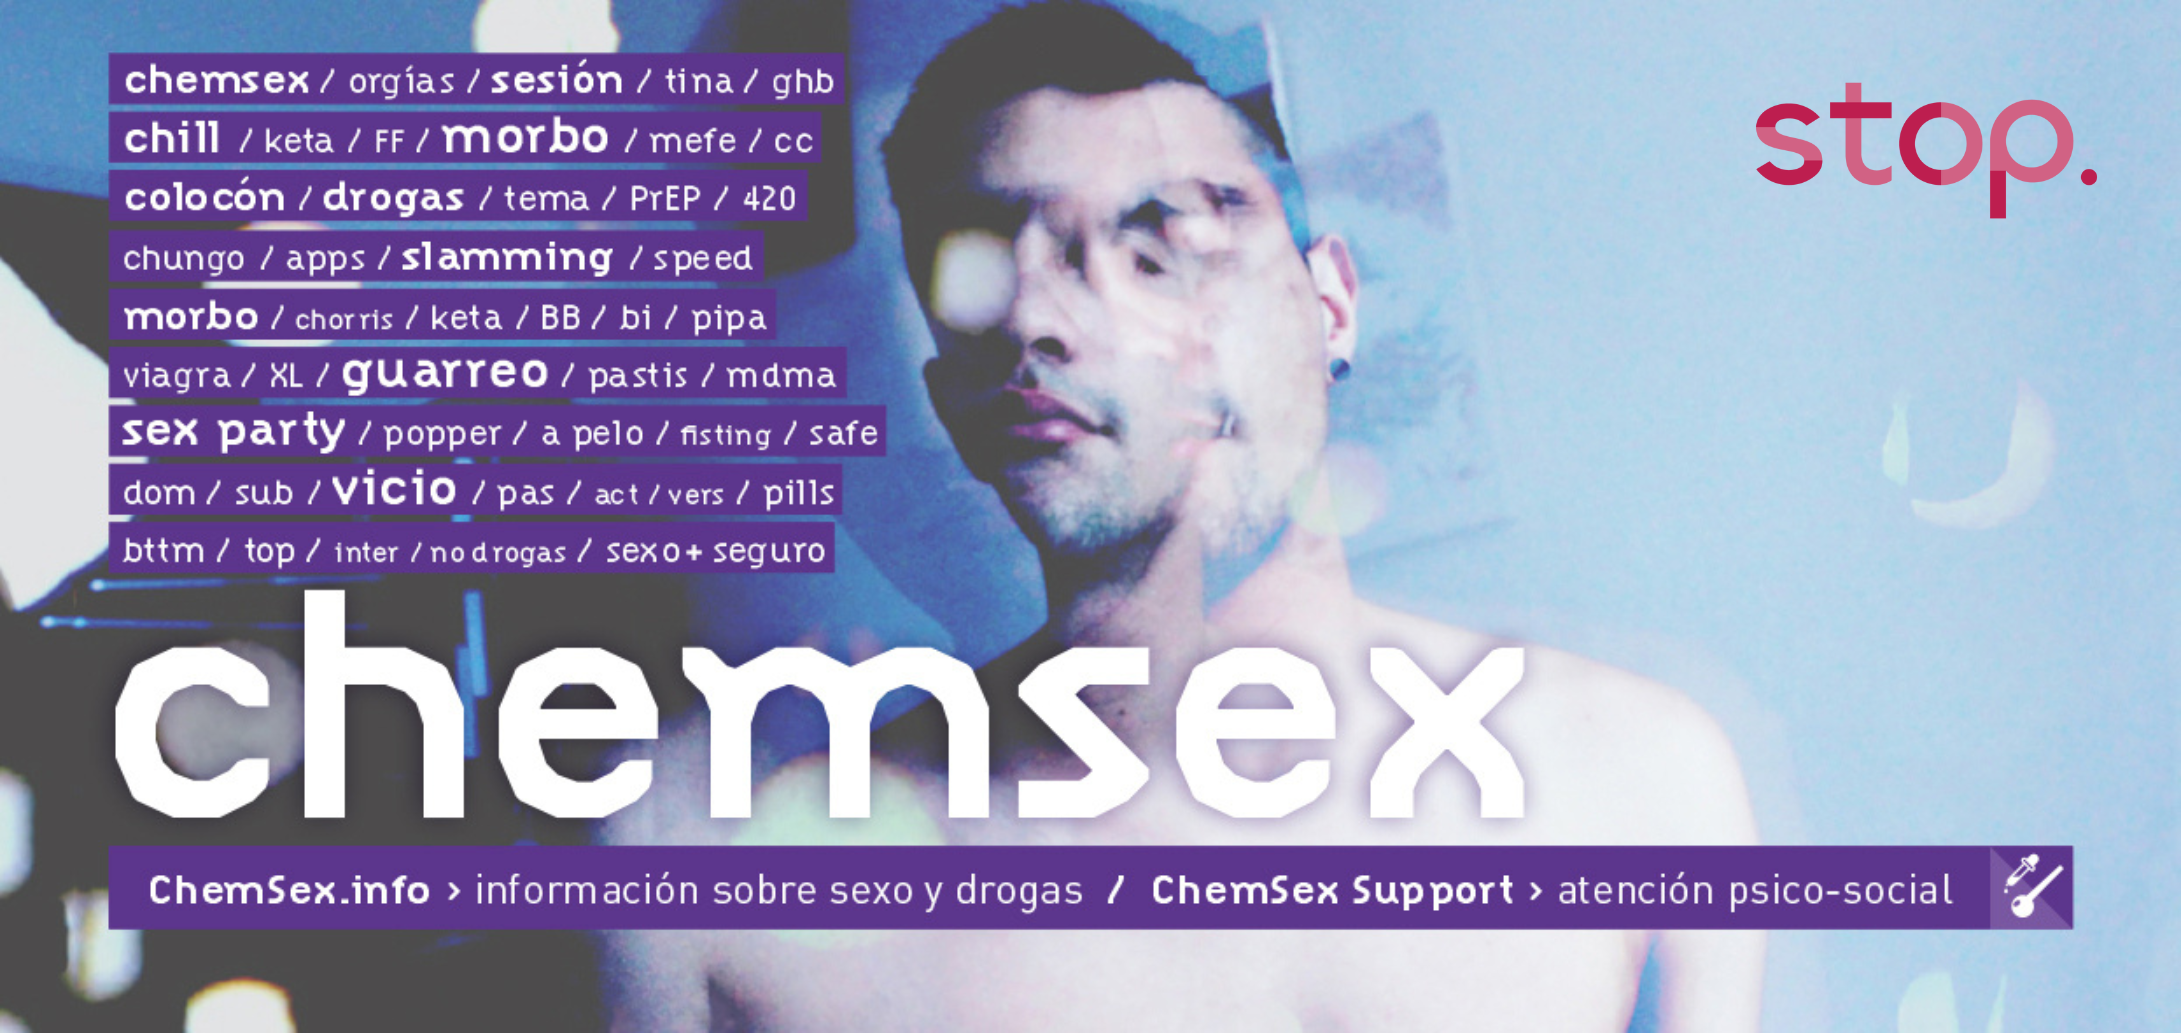 chemsex info barcelona ong stop